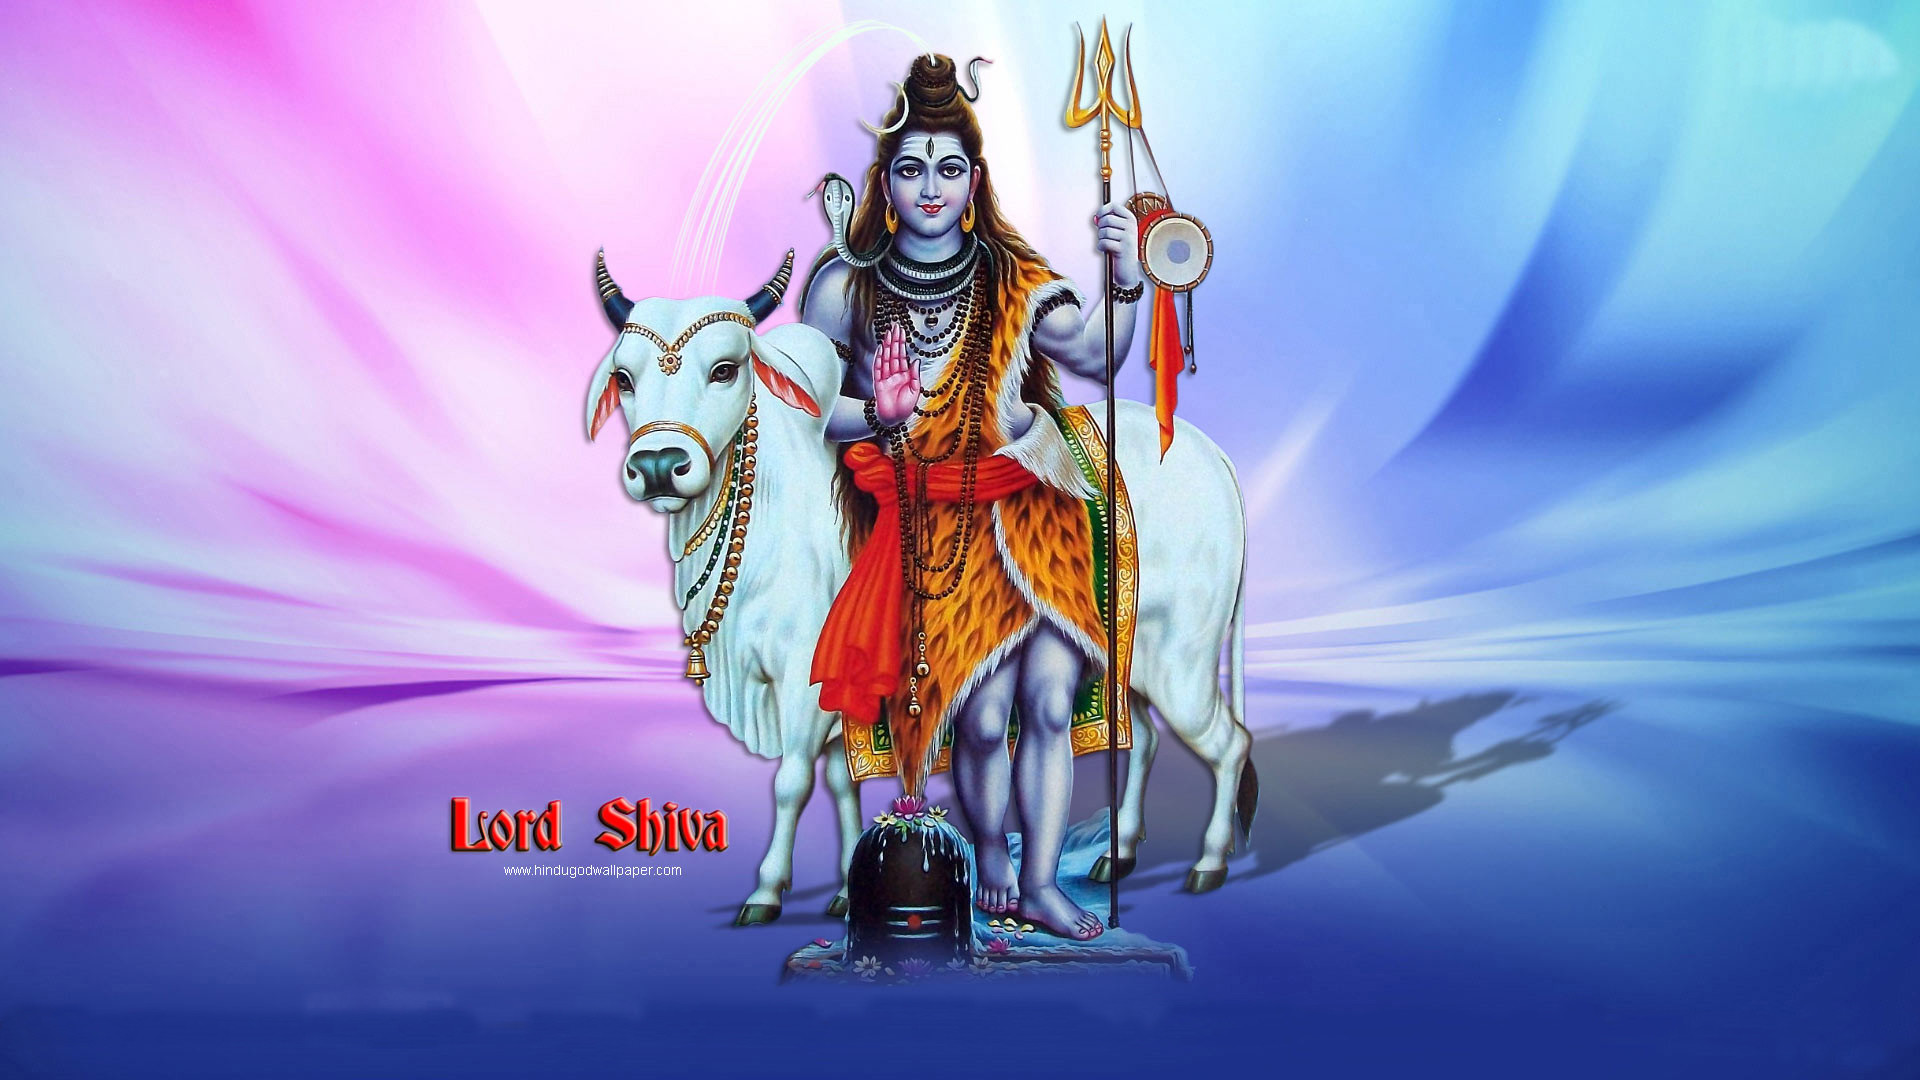 1920x1080 Lord Shiva Wallpapers Free Download Mobile